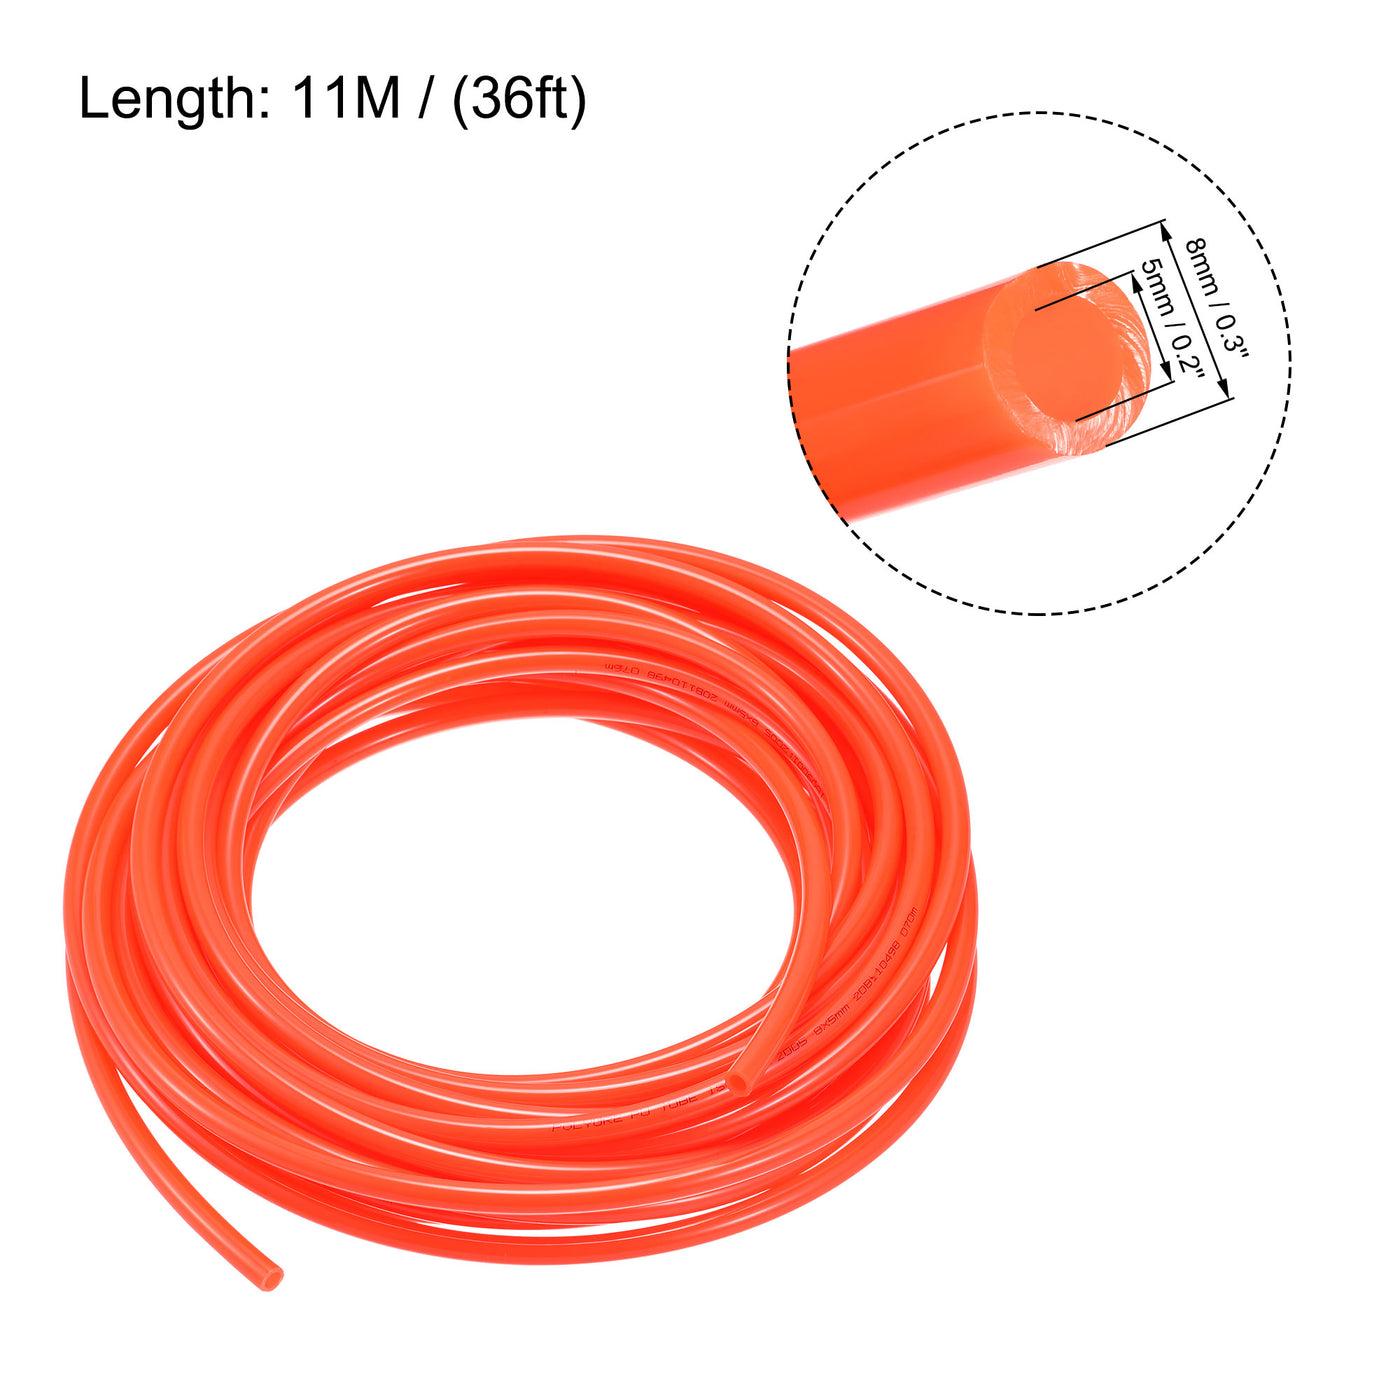 uxcell Uxcell Pneumatic Air Hose Tubing Air Compressor Tube 5mm/0.2''ID x 8mm/0.3''OD x 11m/36Ft Polyurethane Pipe Bright Orange